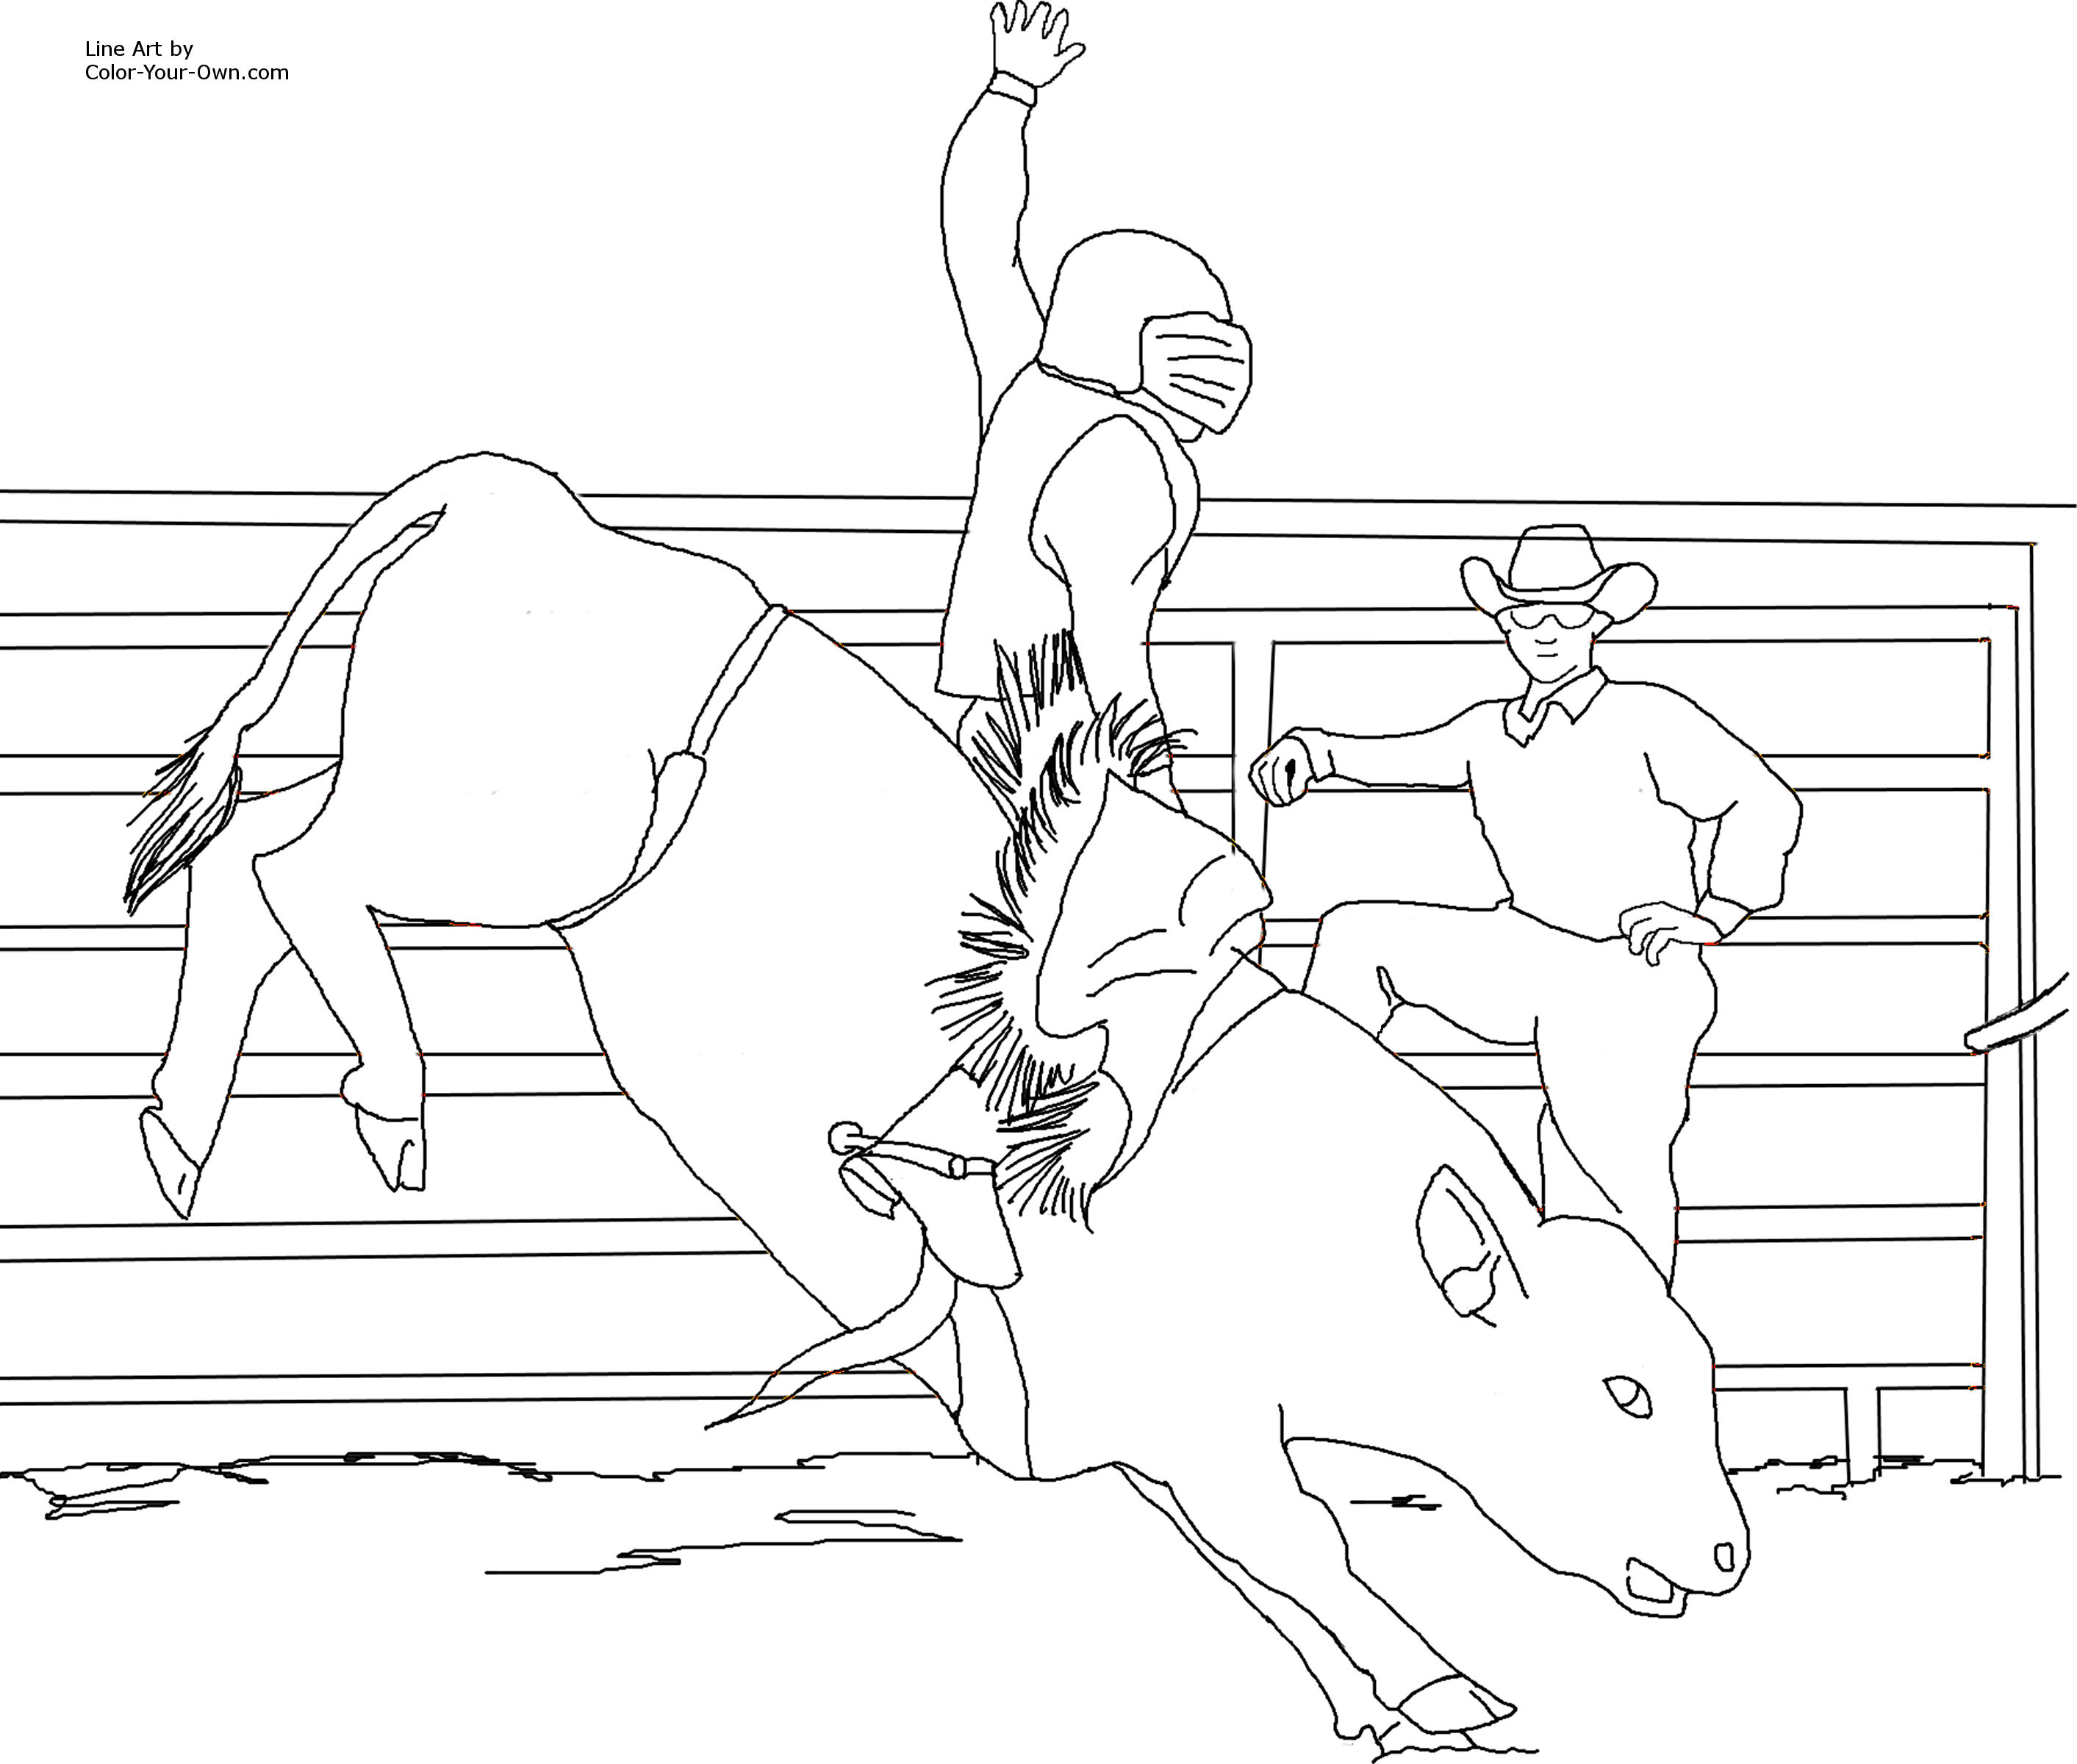 Miniature Bucking Bull Coloring Page